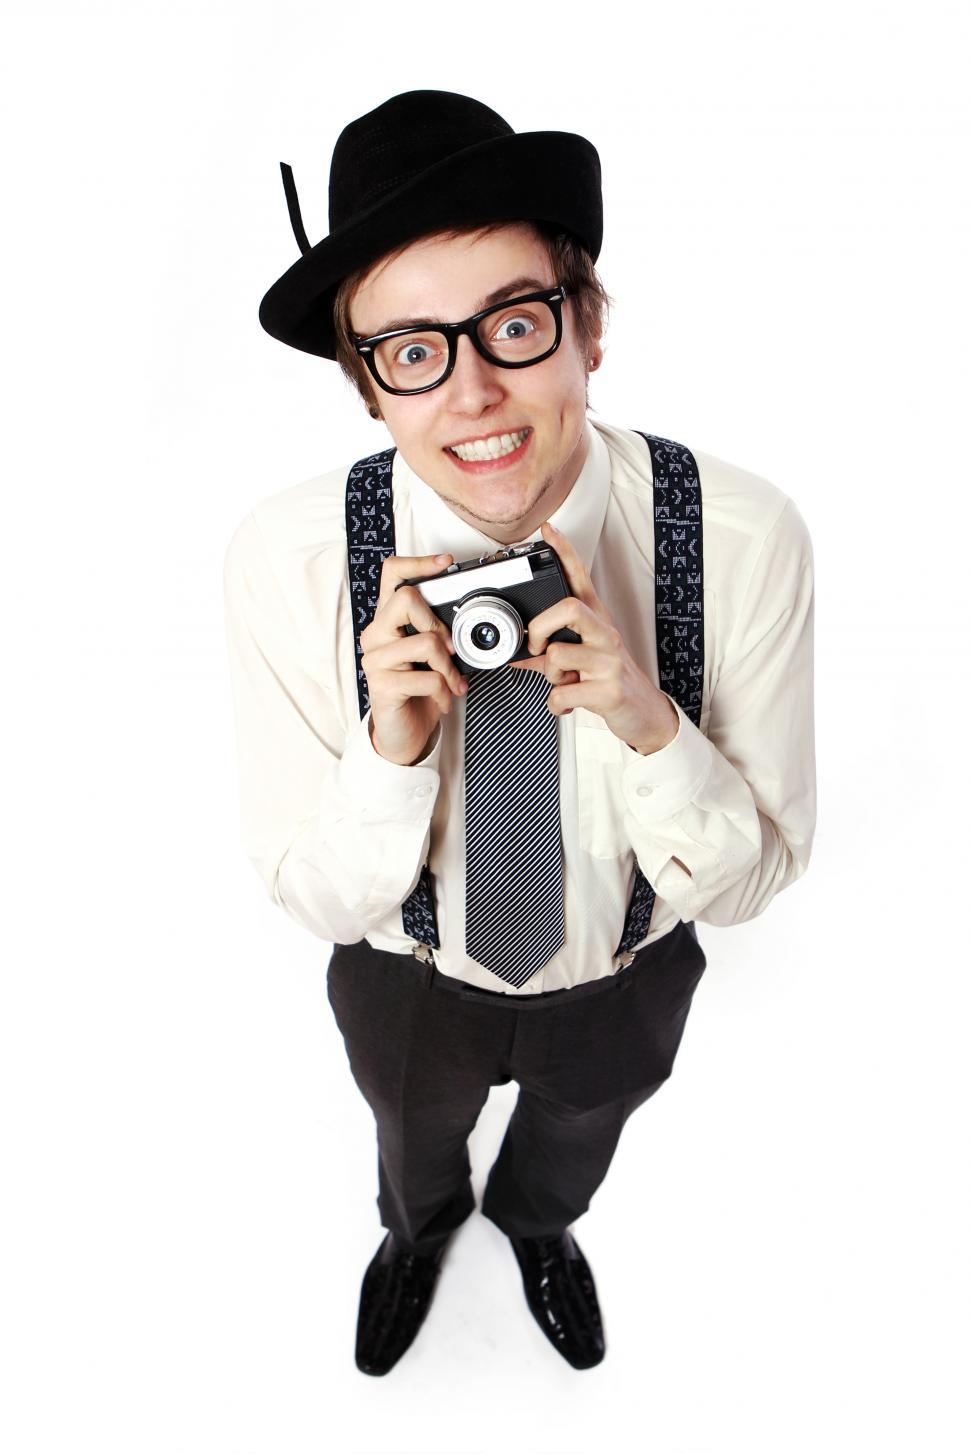 Free Image of Odd old fashioned photographer 